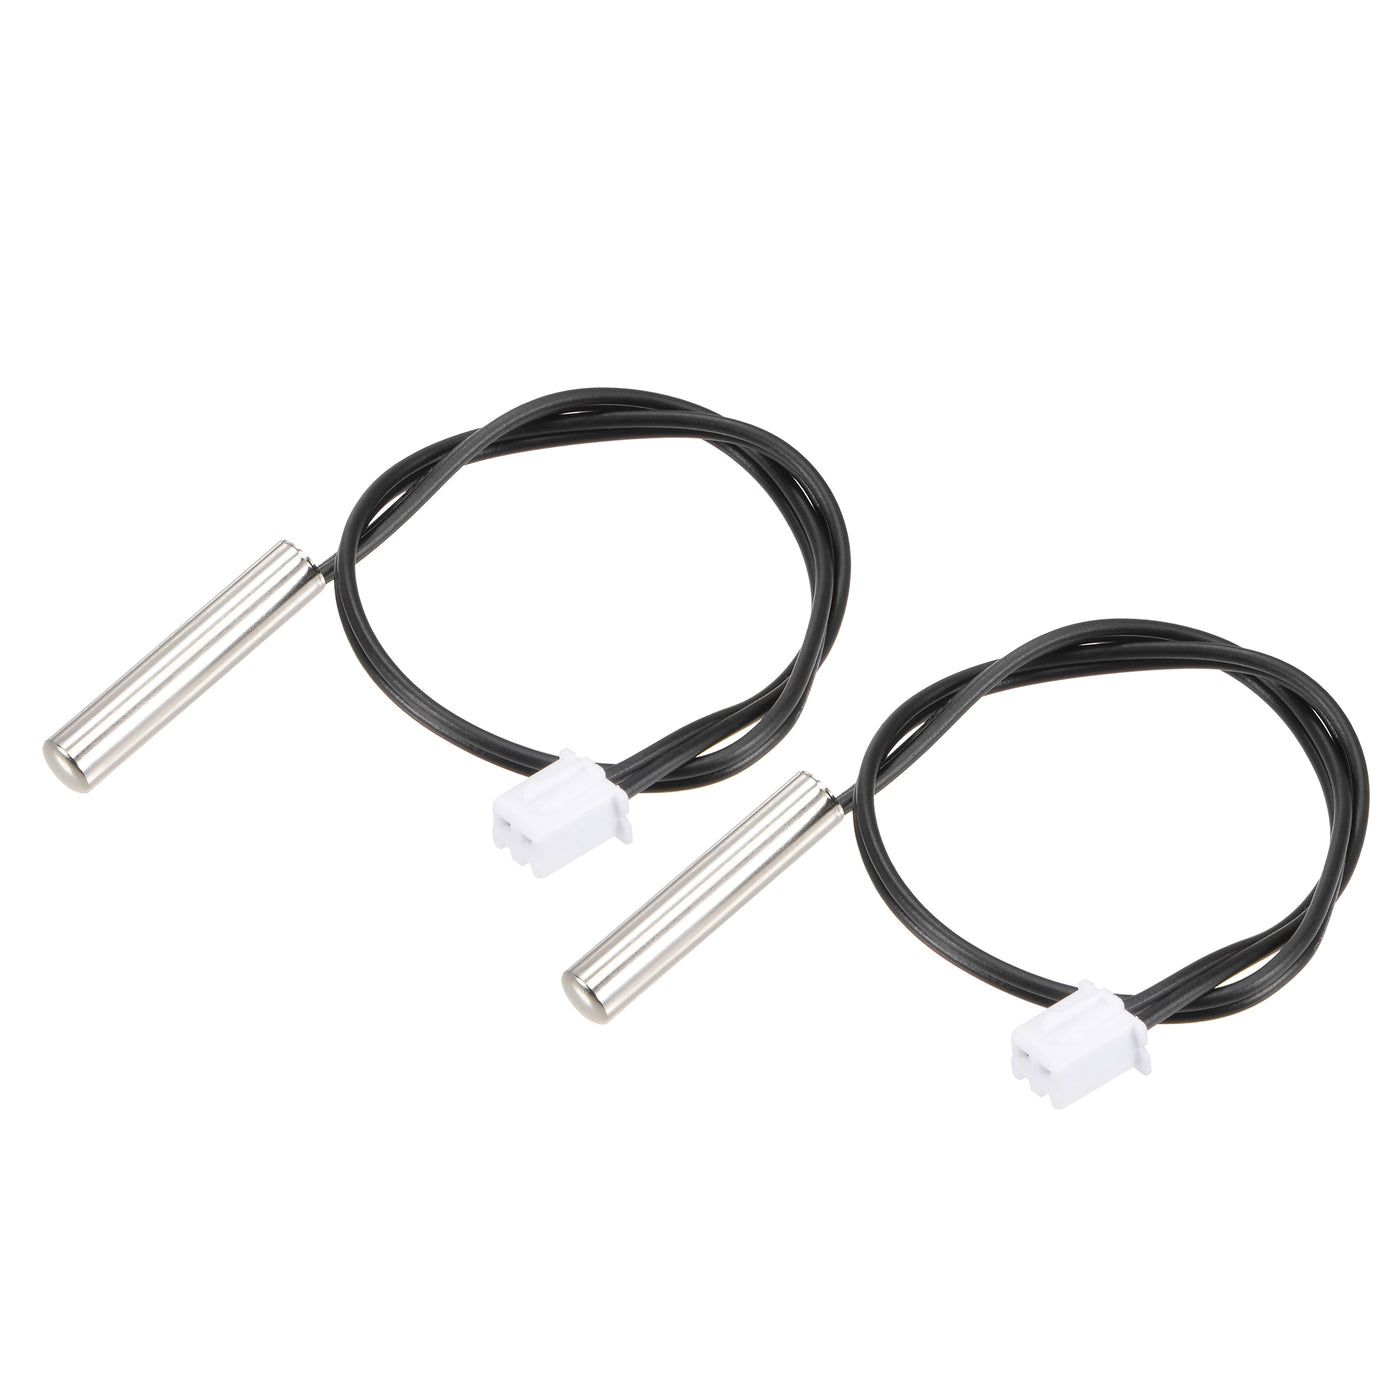 uxcell Uxcell 2pcs 5K Temperature Sensor Probe, Stainless Steel NTC Thermal Sensor Probe 200mm Digital Thermometer Extension Cable